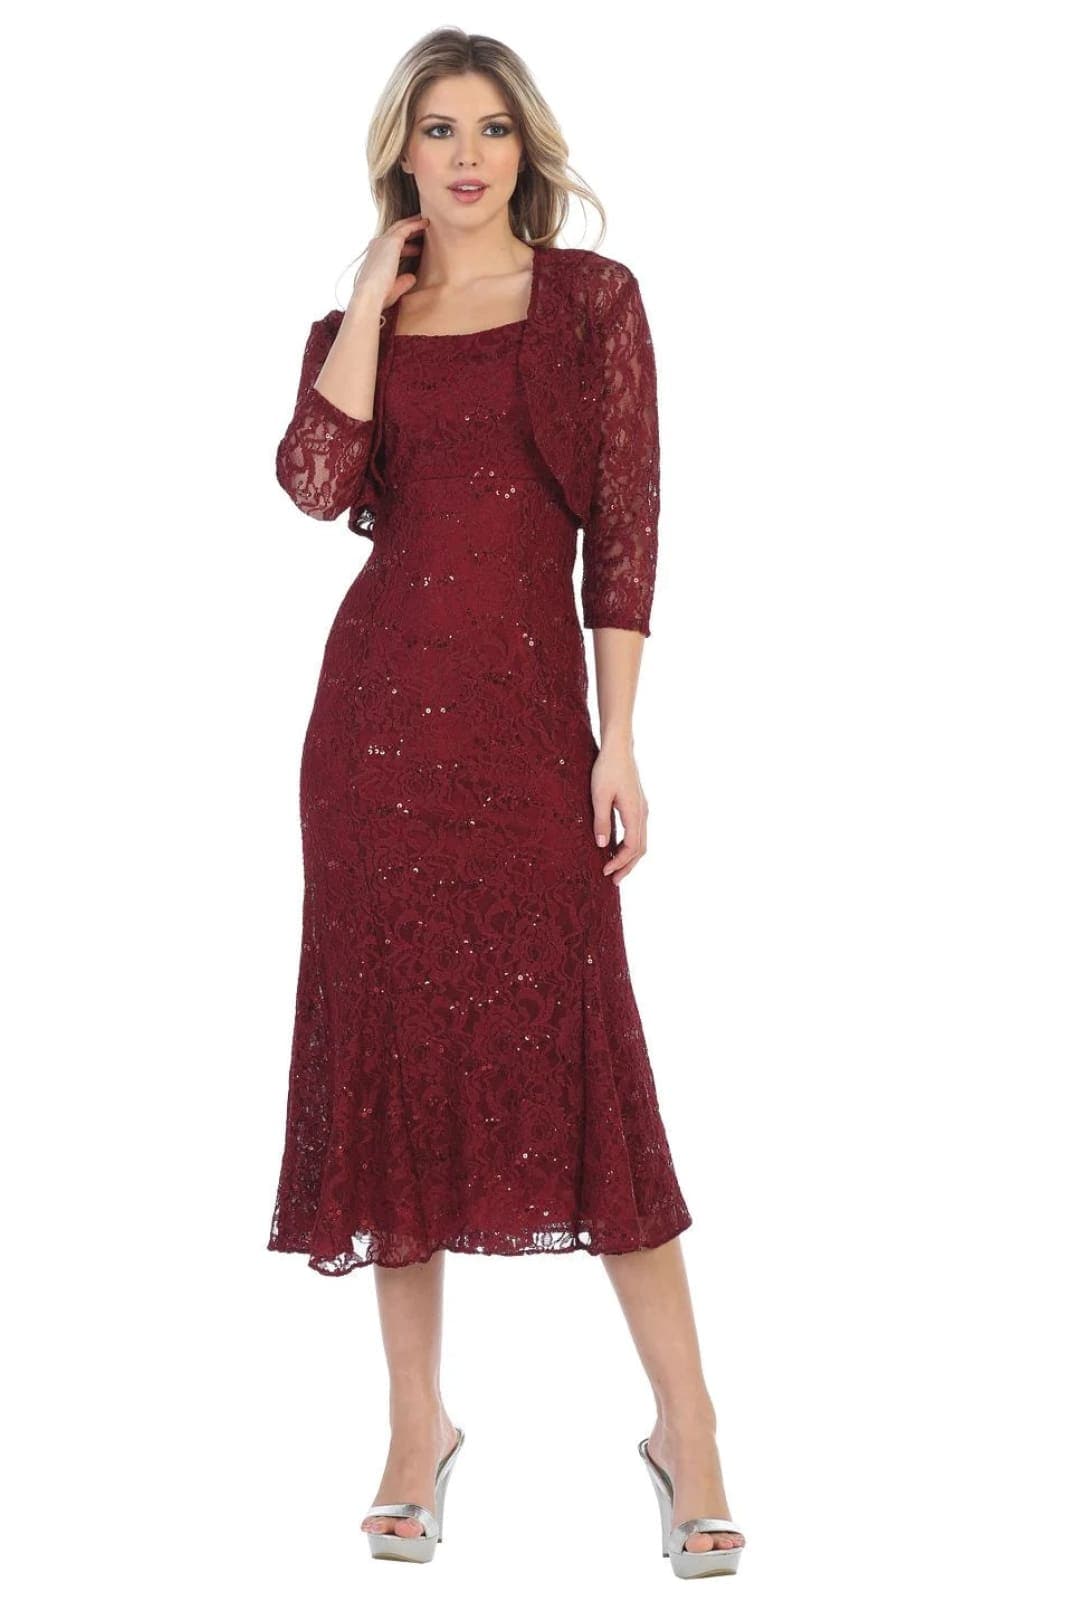 Plus Size Dresses Mother of the Bride - Burgundy / S